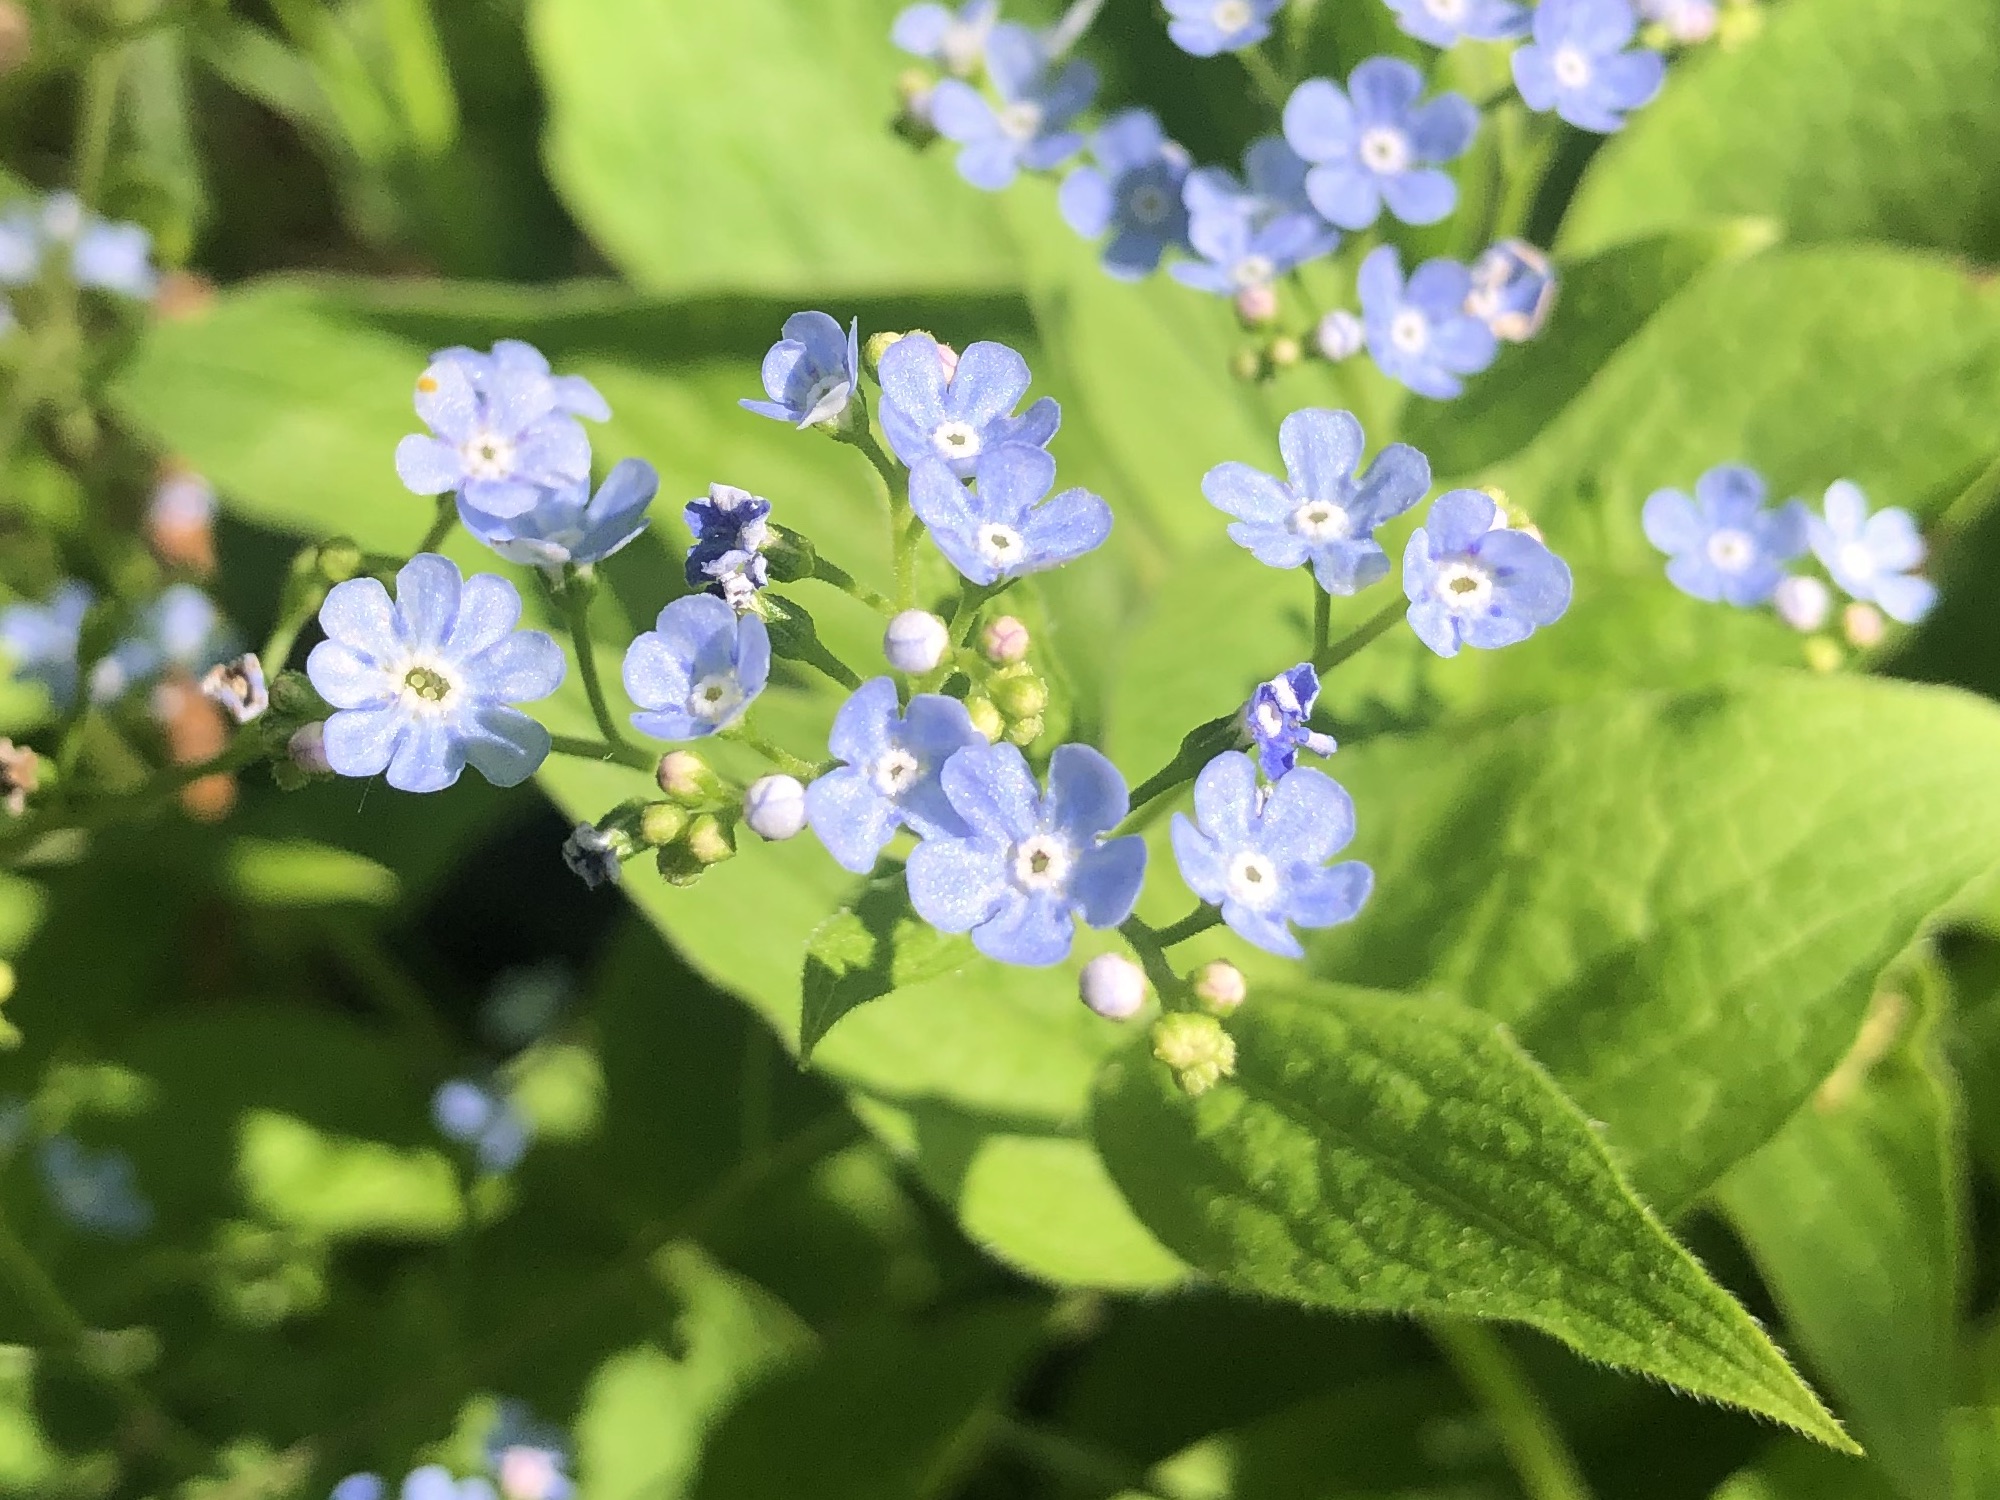 False Forget-Me-Not in the Thoreau Rain Garden in Madison, Wisconsin on May 16, 2022